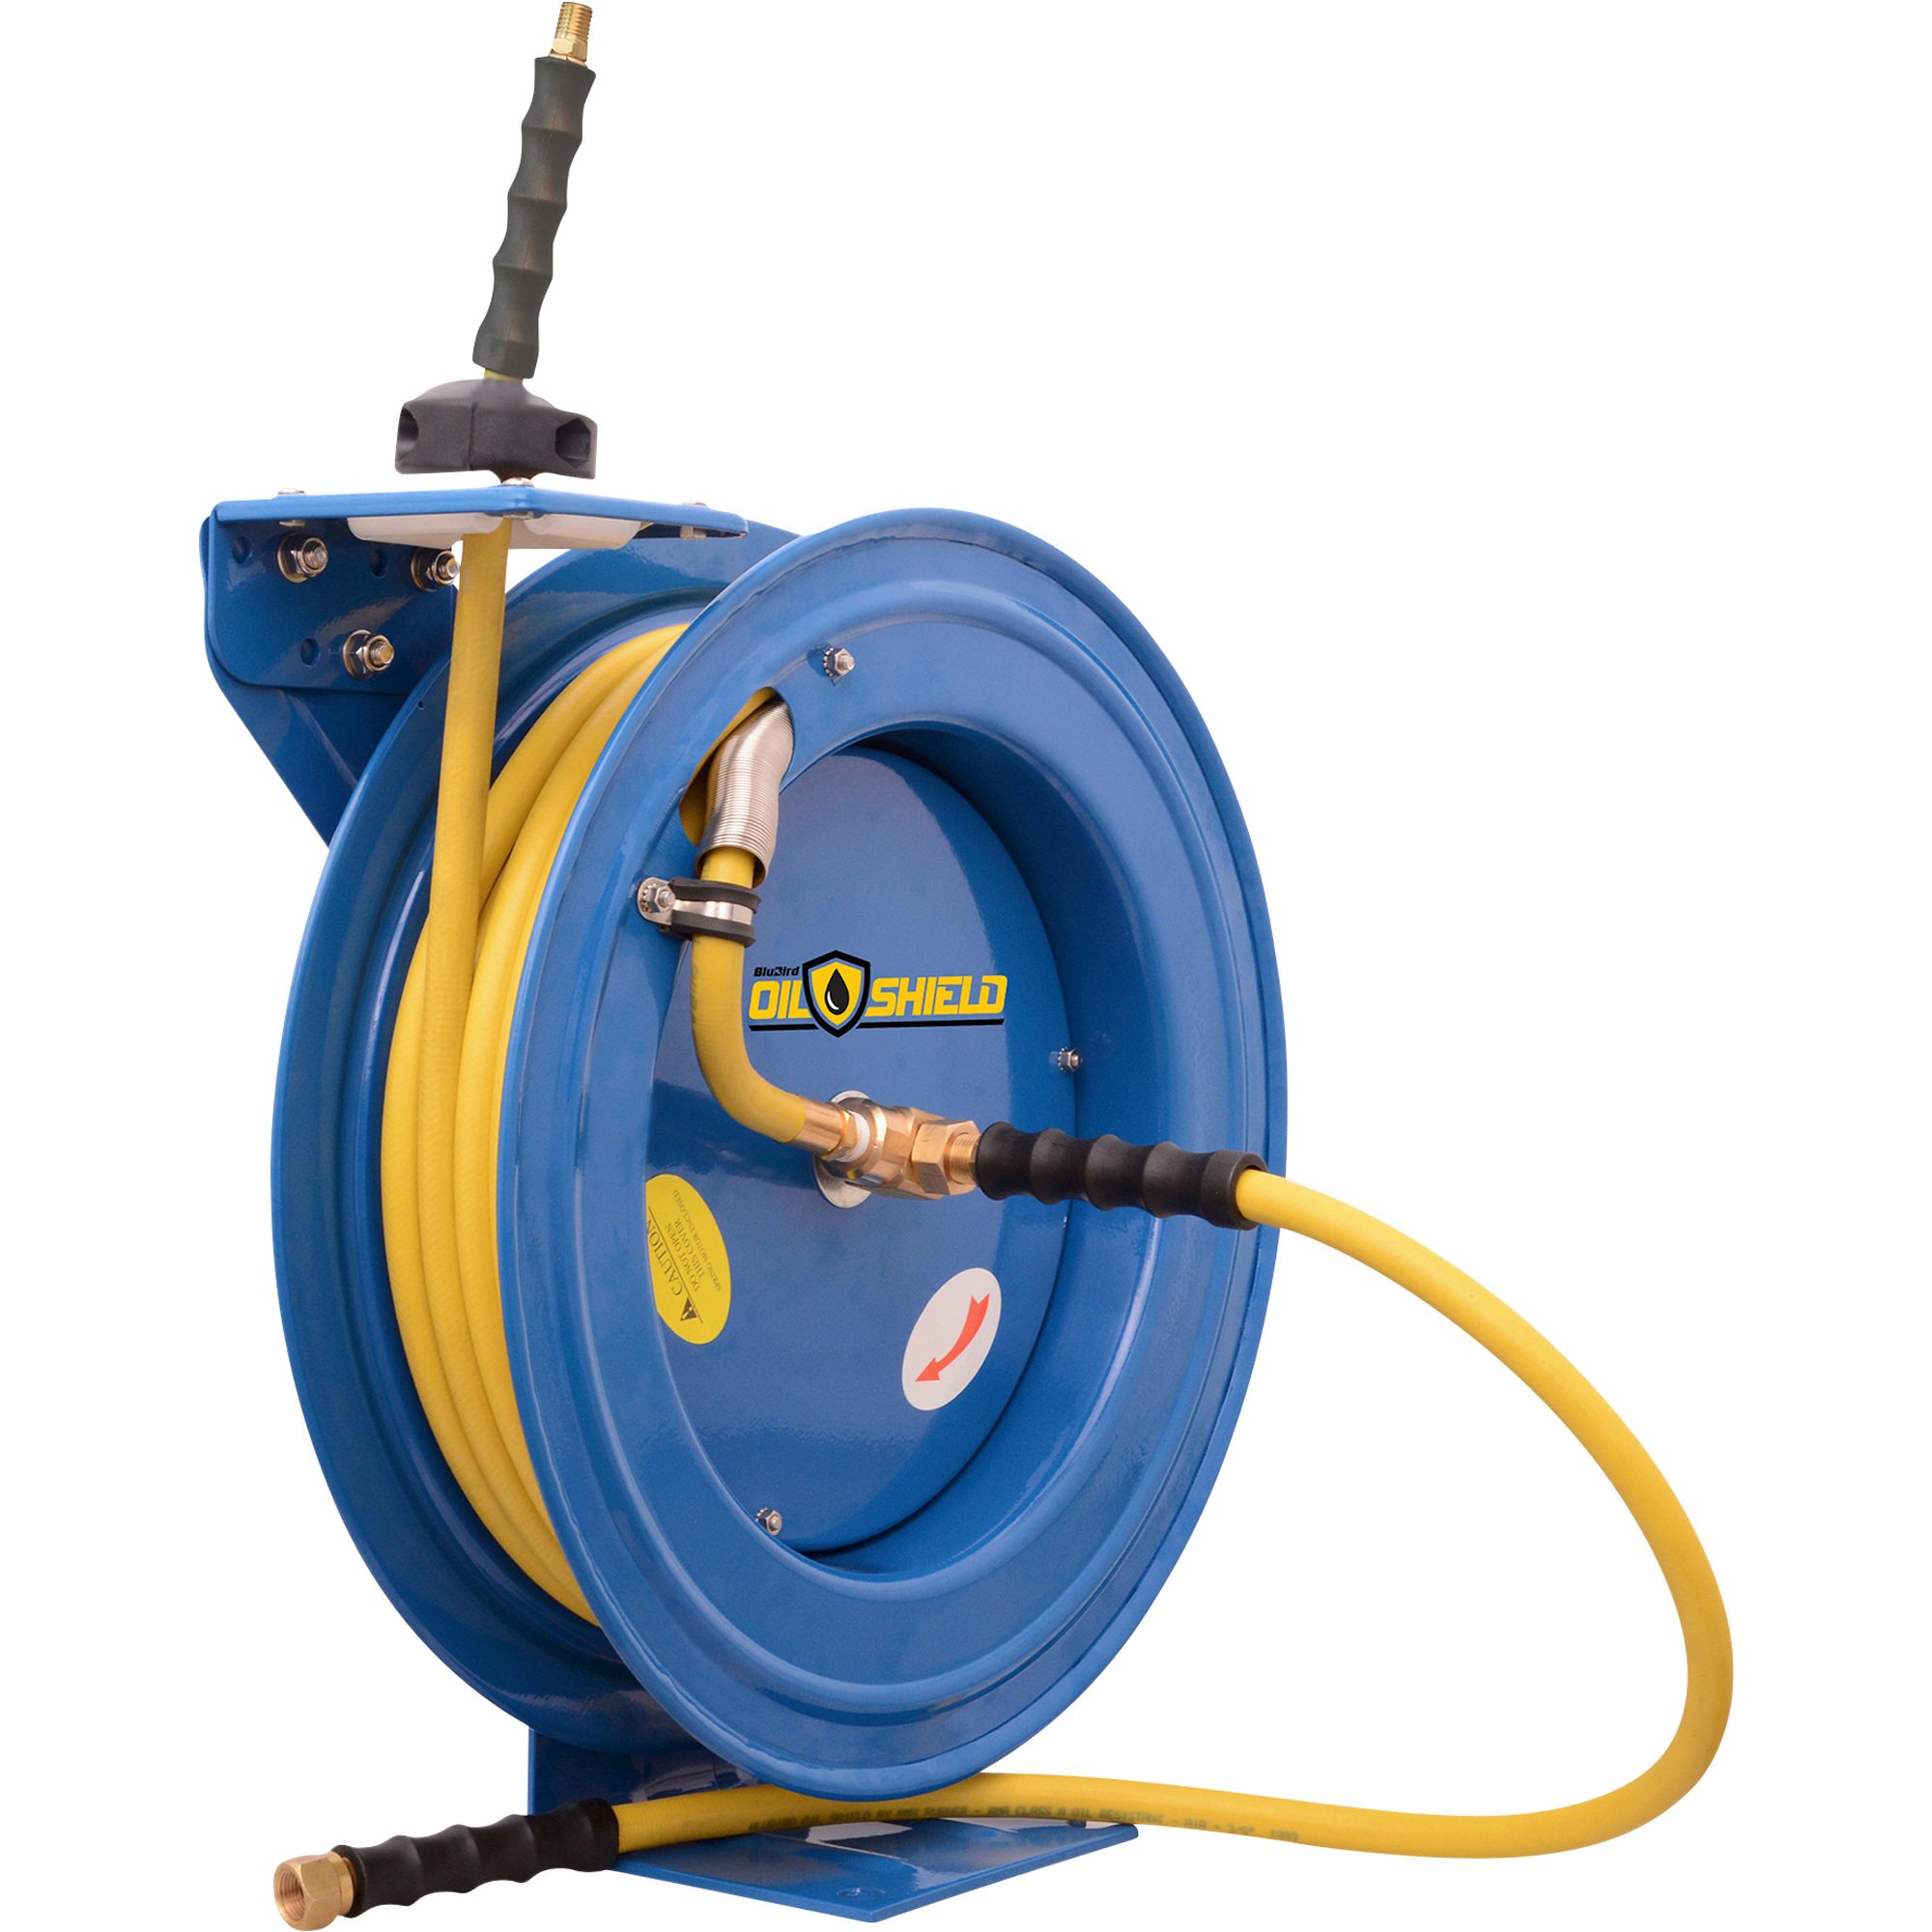 Air hose 3/8 in. x 50 ft. Retractable Hose Reel has a locking ratchet system